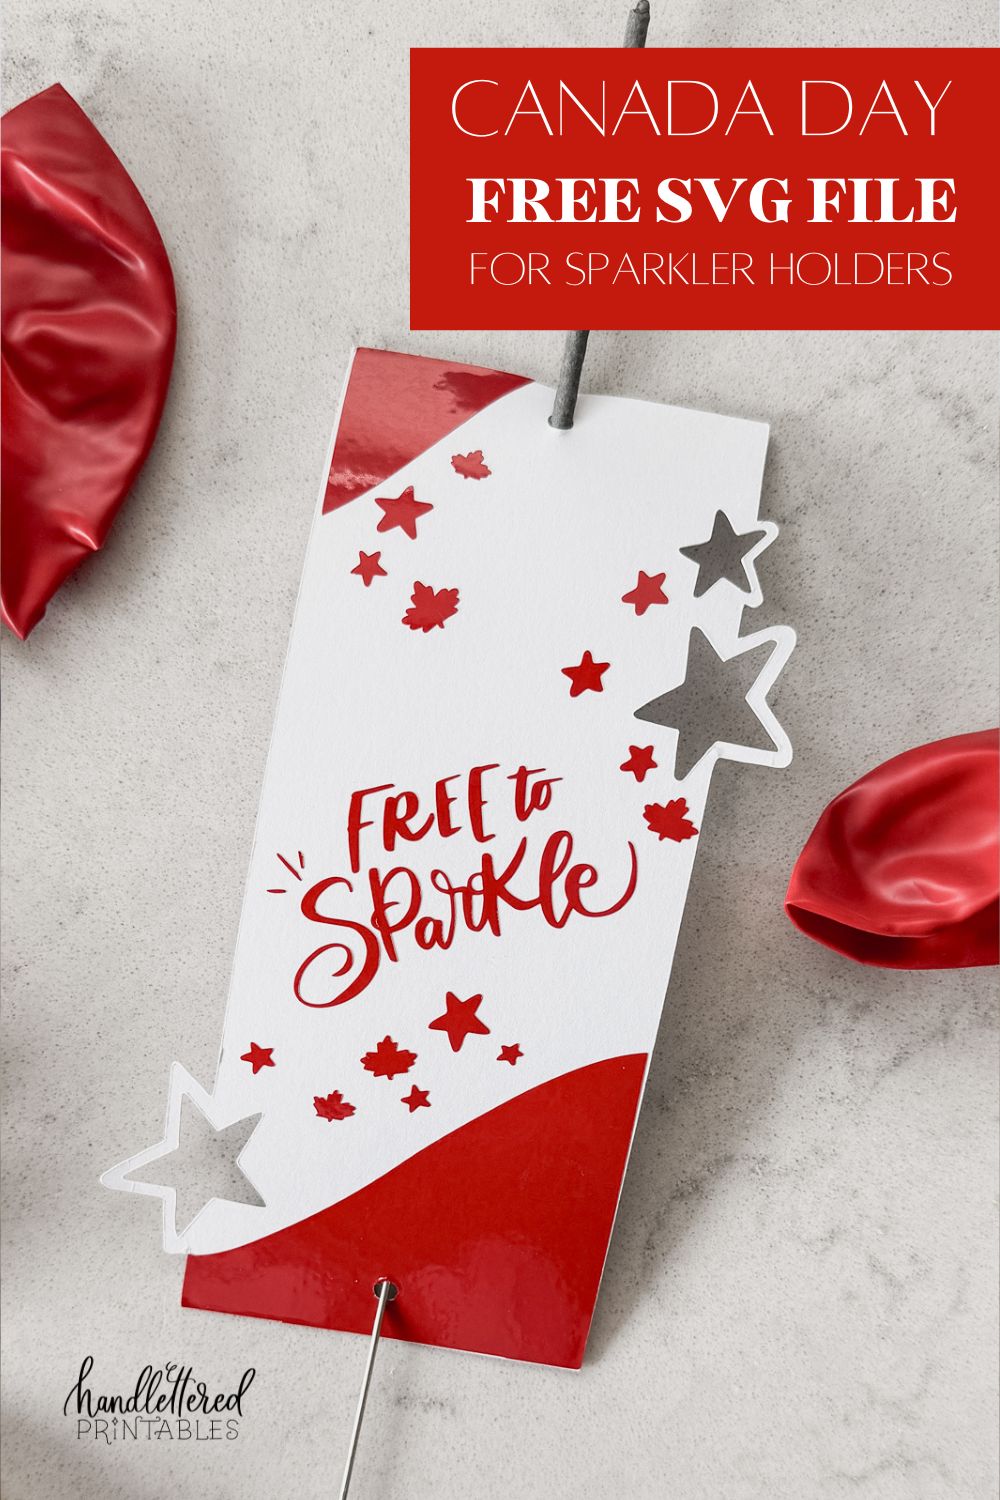 image of sparkler holder made with cricut- design has stars and maple leaves and the hand lettering 'free to sparkle' sparkler holder shown on marble countertop with red and white balloons text over image reads: canada day free SVG file for sparkler holders